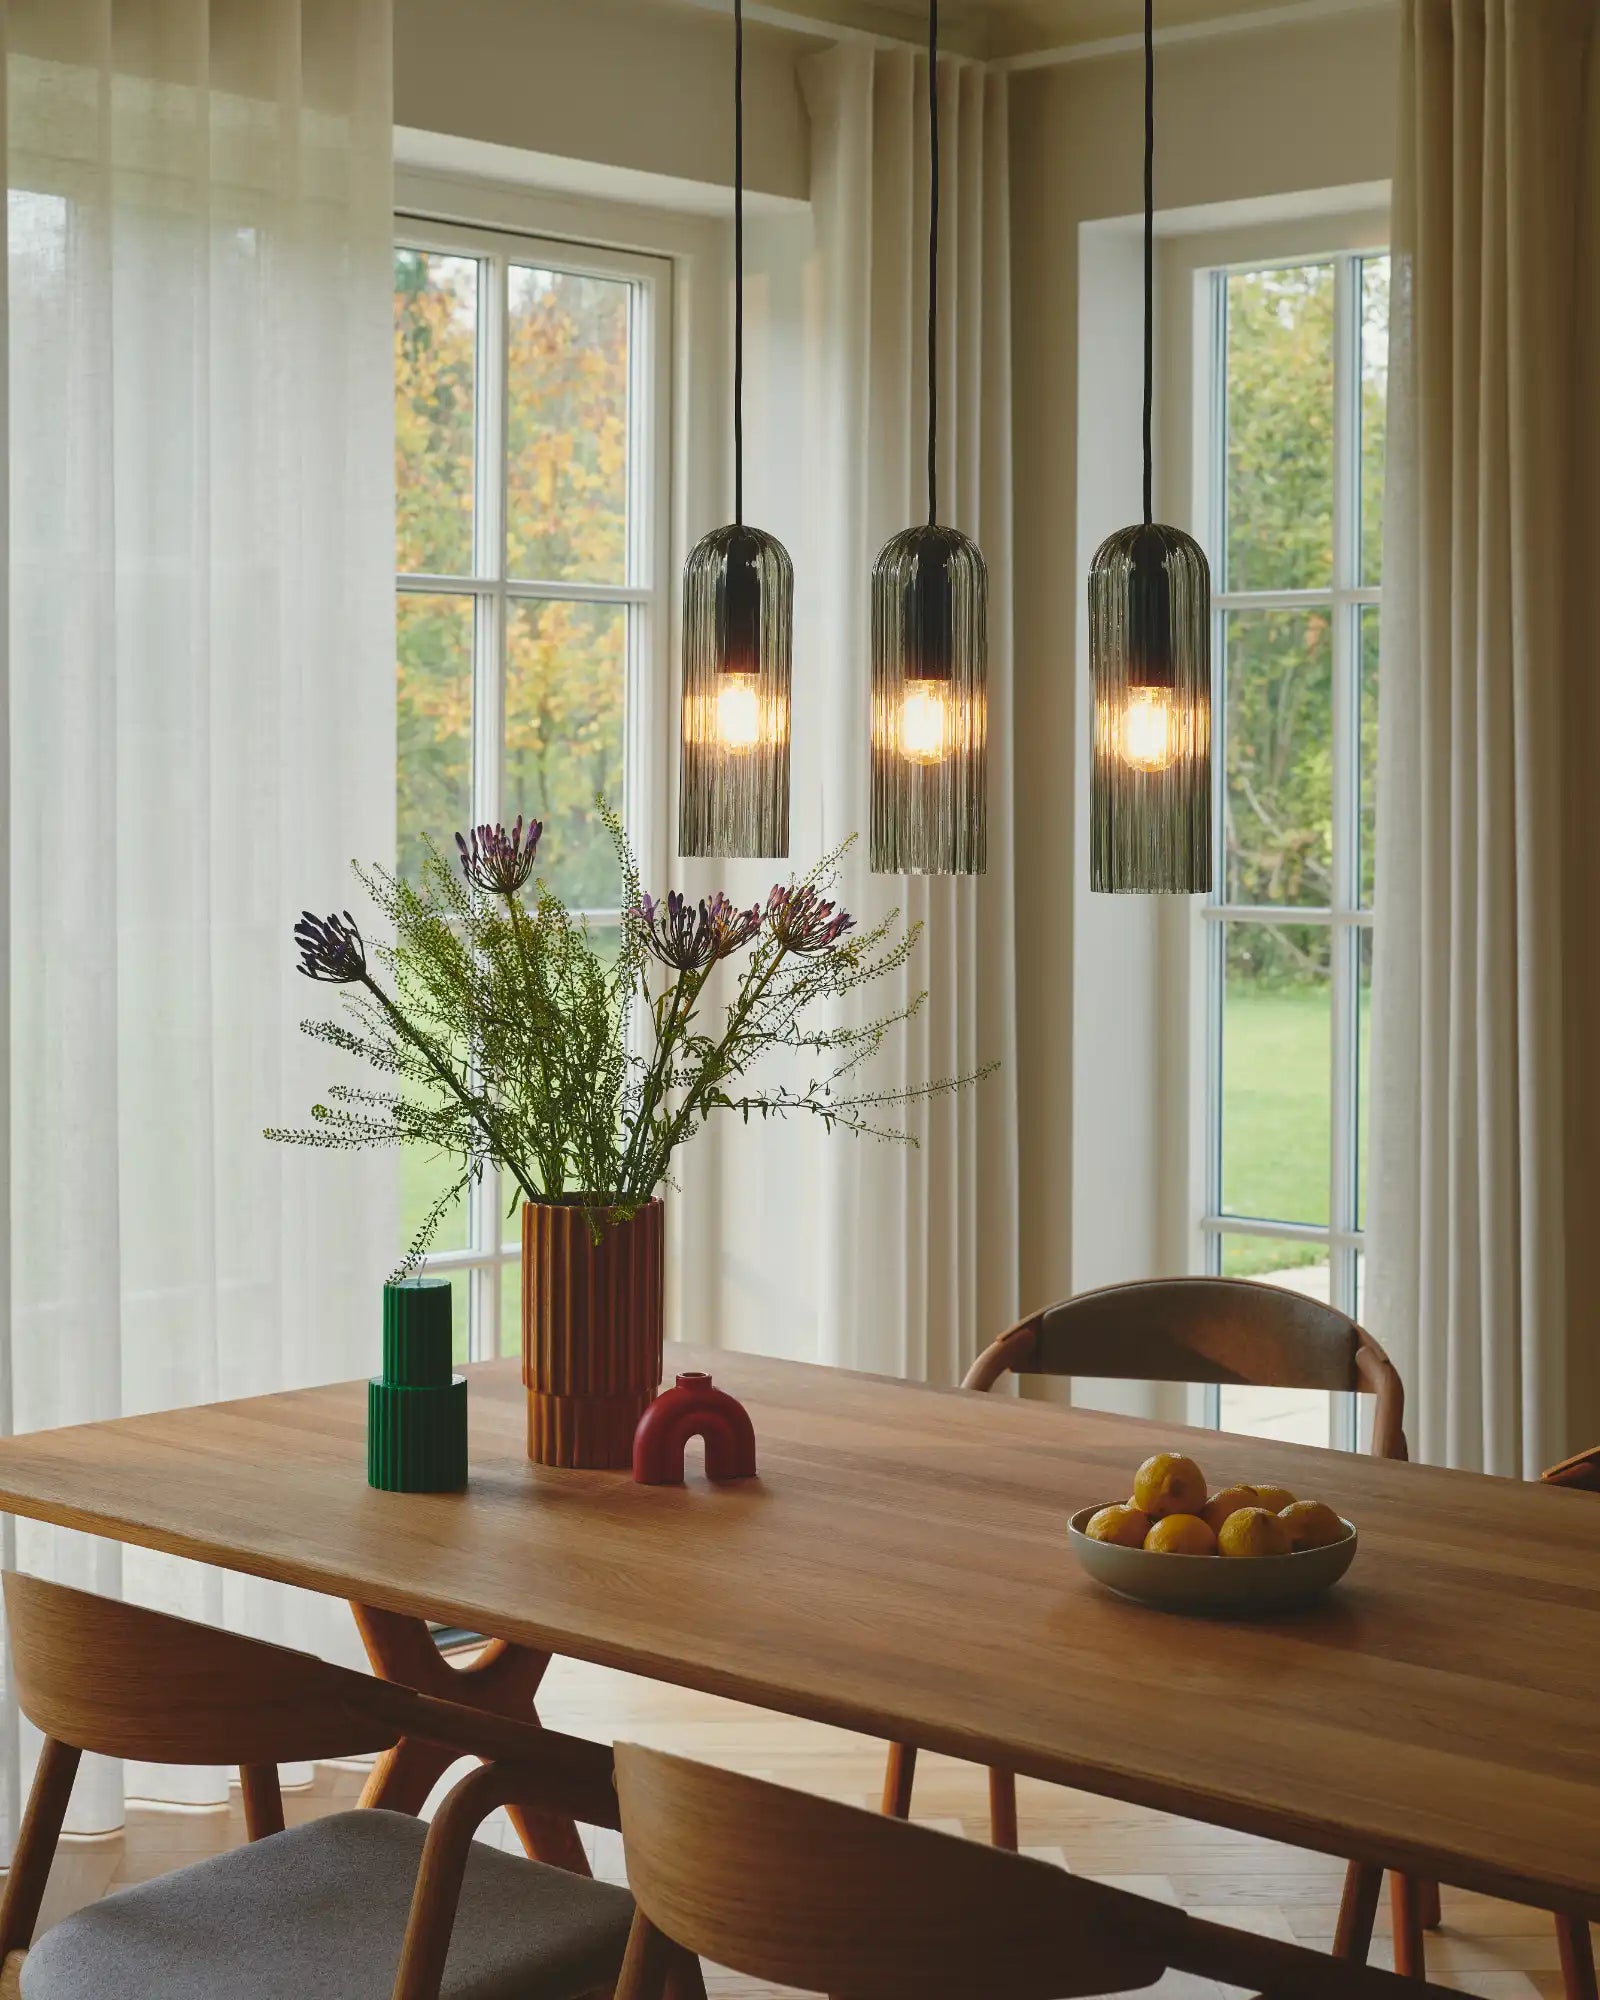 Miella 3lt Pendant Light by Nordlux Lighting featured within a contemporary dining room | Nook Collections